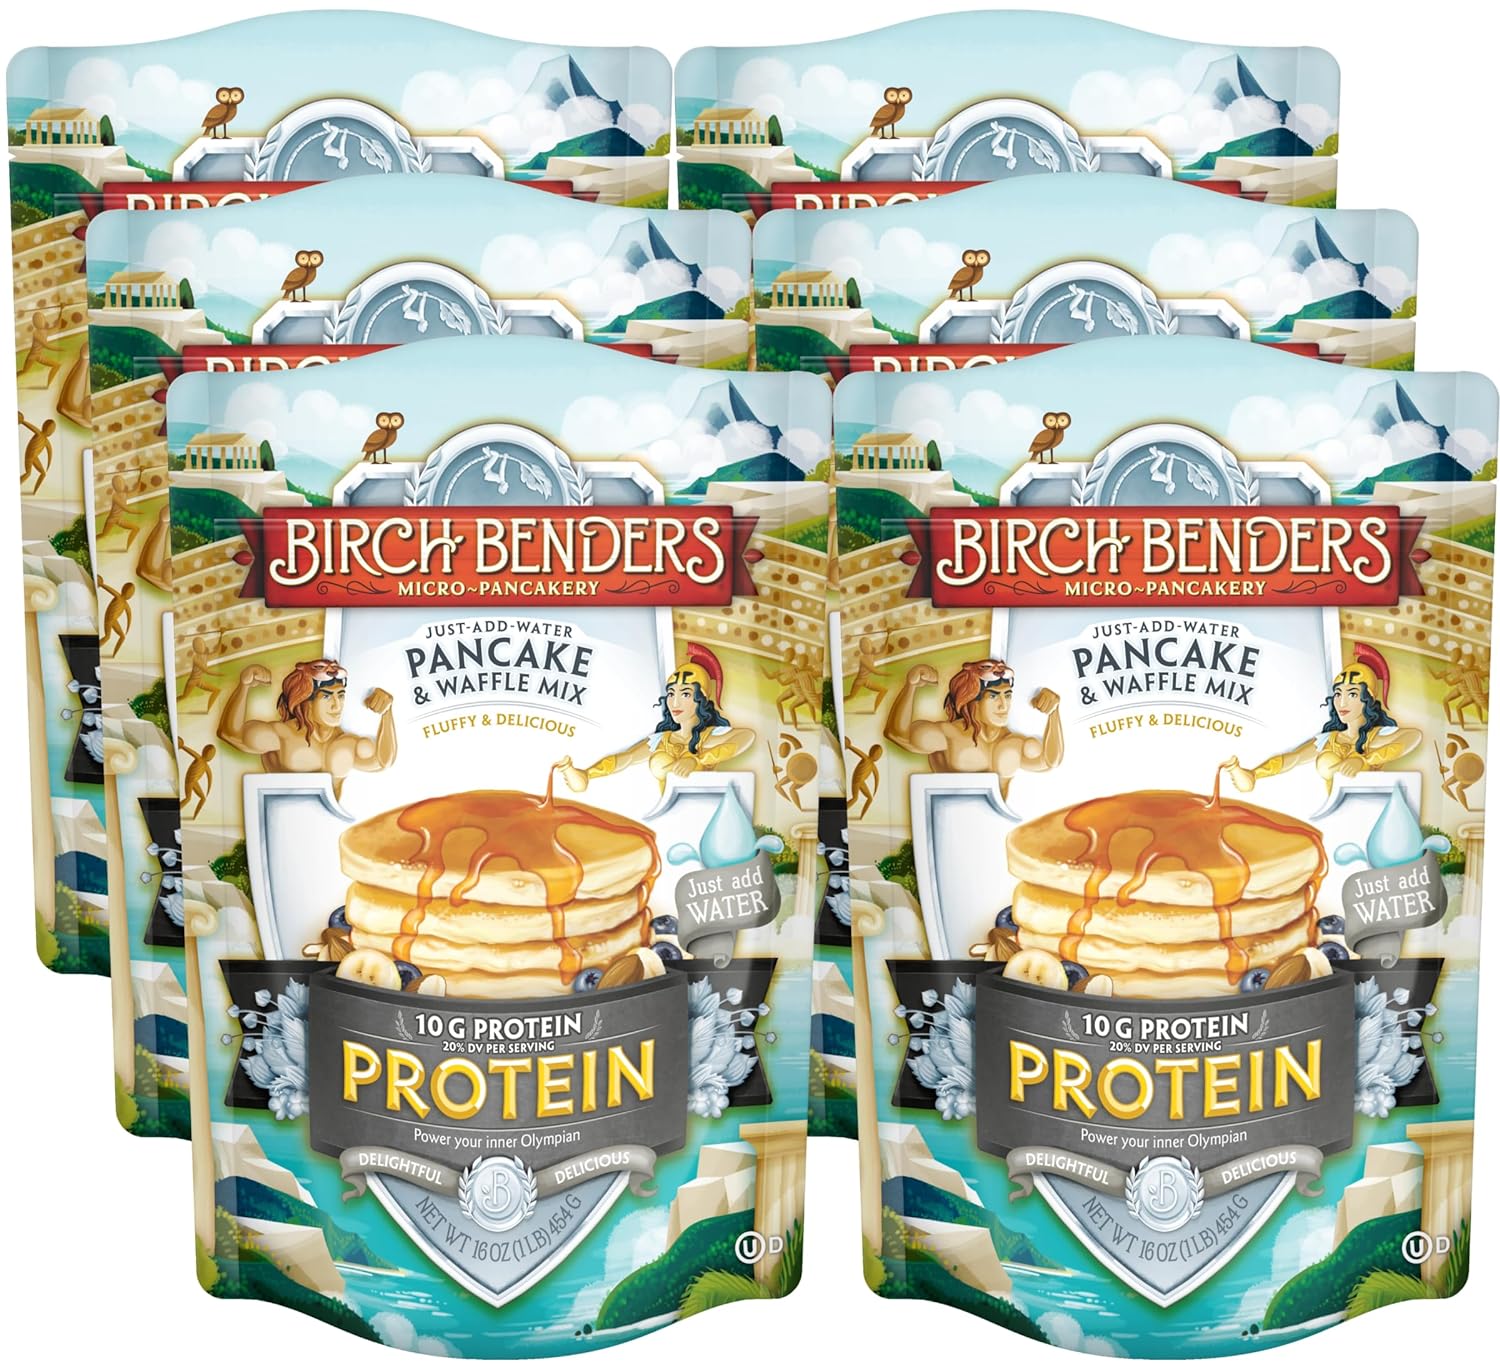 Performance Protein Pancake and Waffle Mix with Whey Protein by Birch Benders, 10 Grams Protein Per Serving, 1 Pound (Pack of 6)